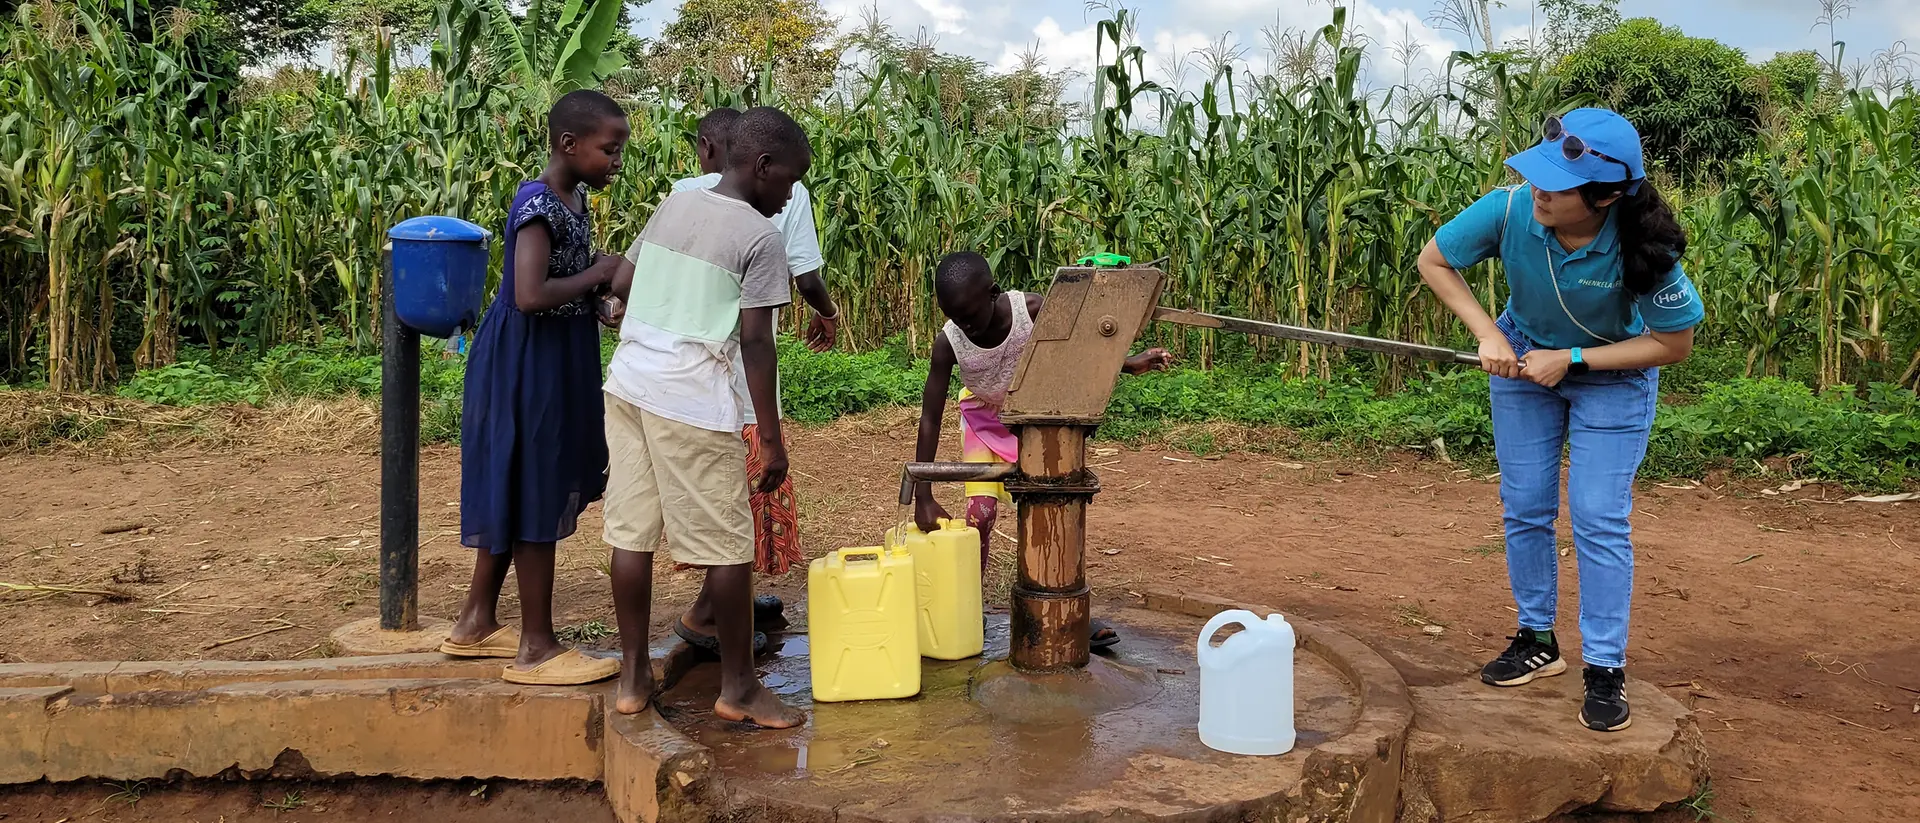 A volunteer fetches water from the pump together with the kids from the orphanages.